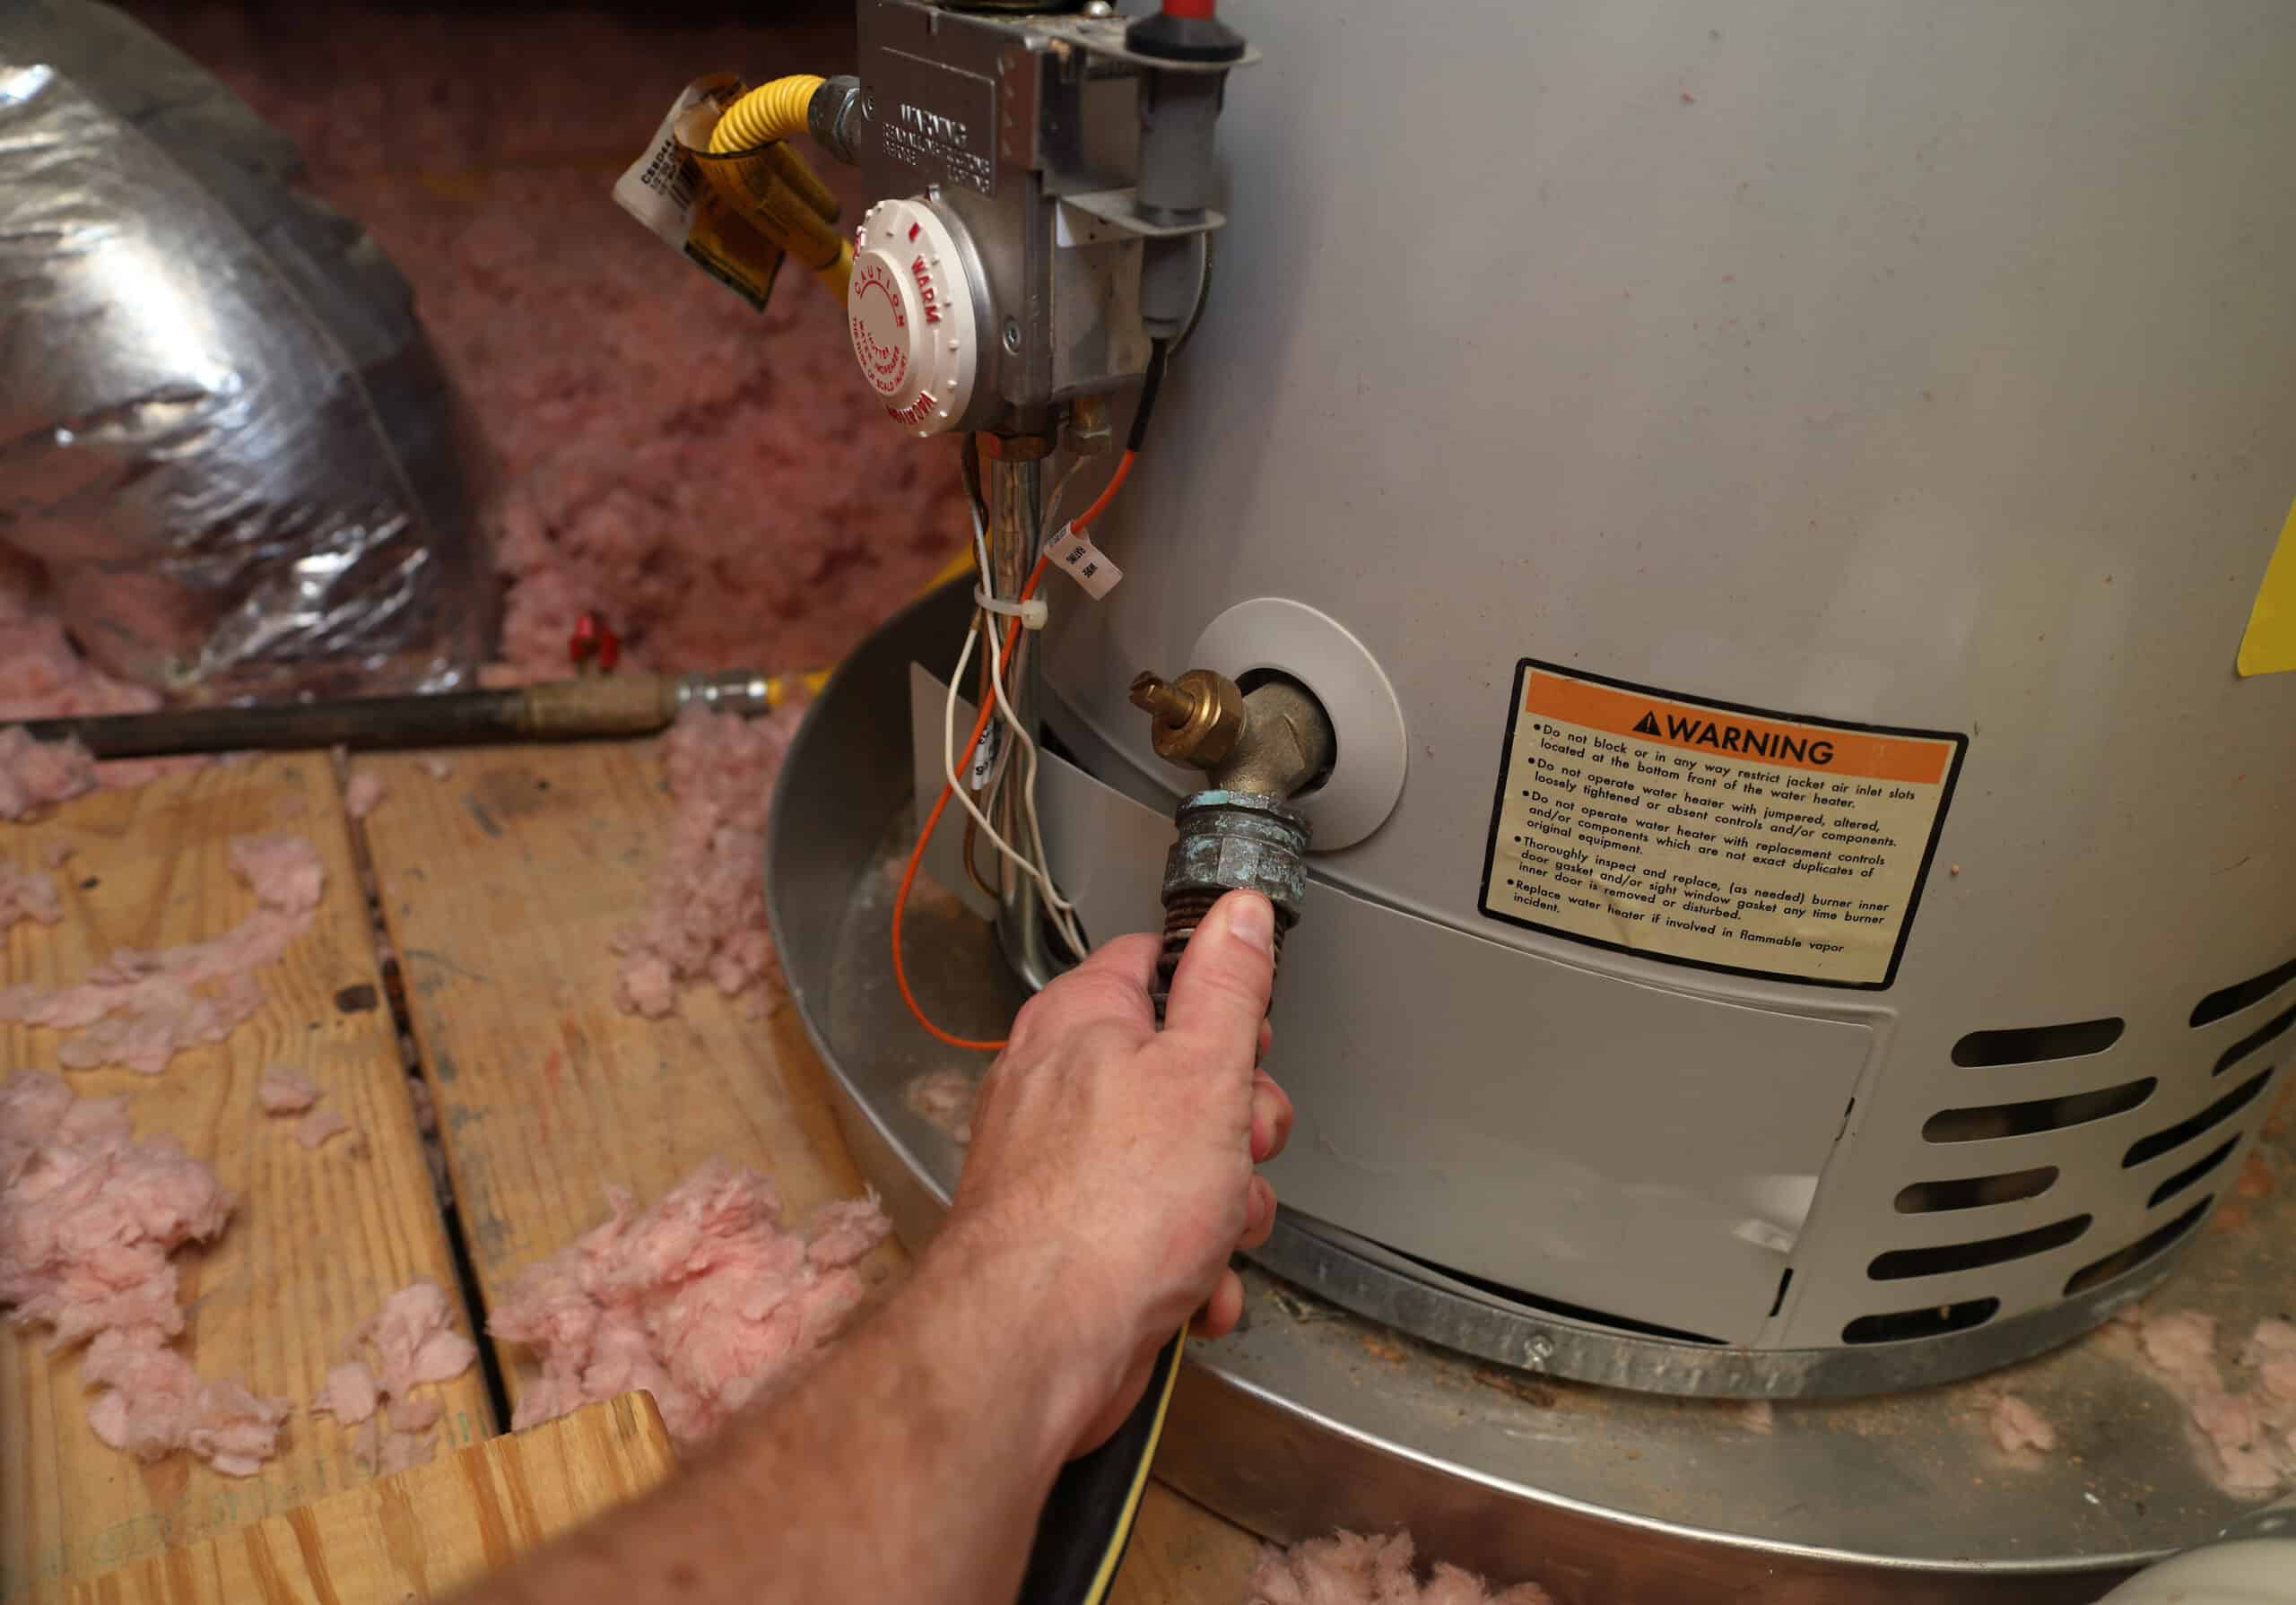 Hand attaches hose to a home water heater to perform maintenance at a home in louisiana